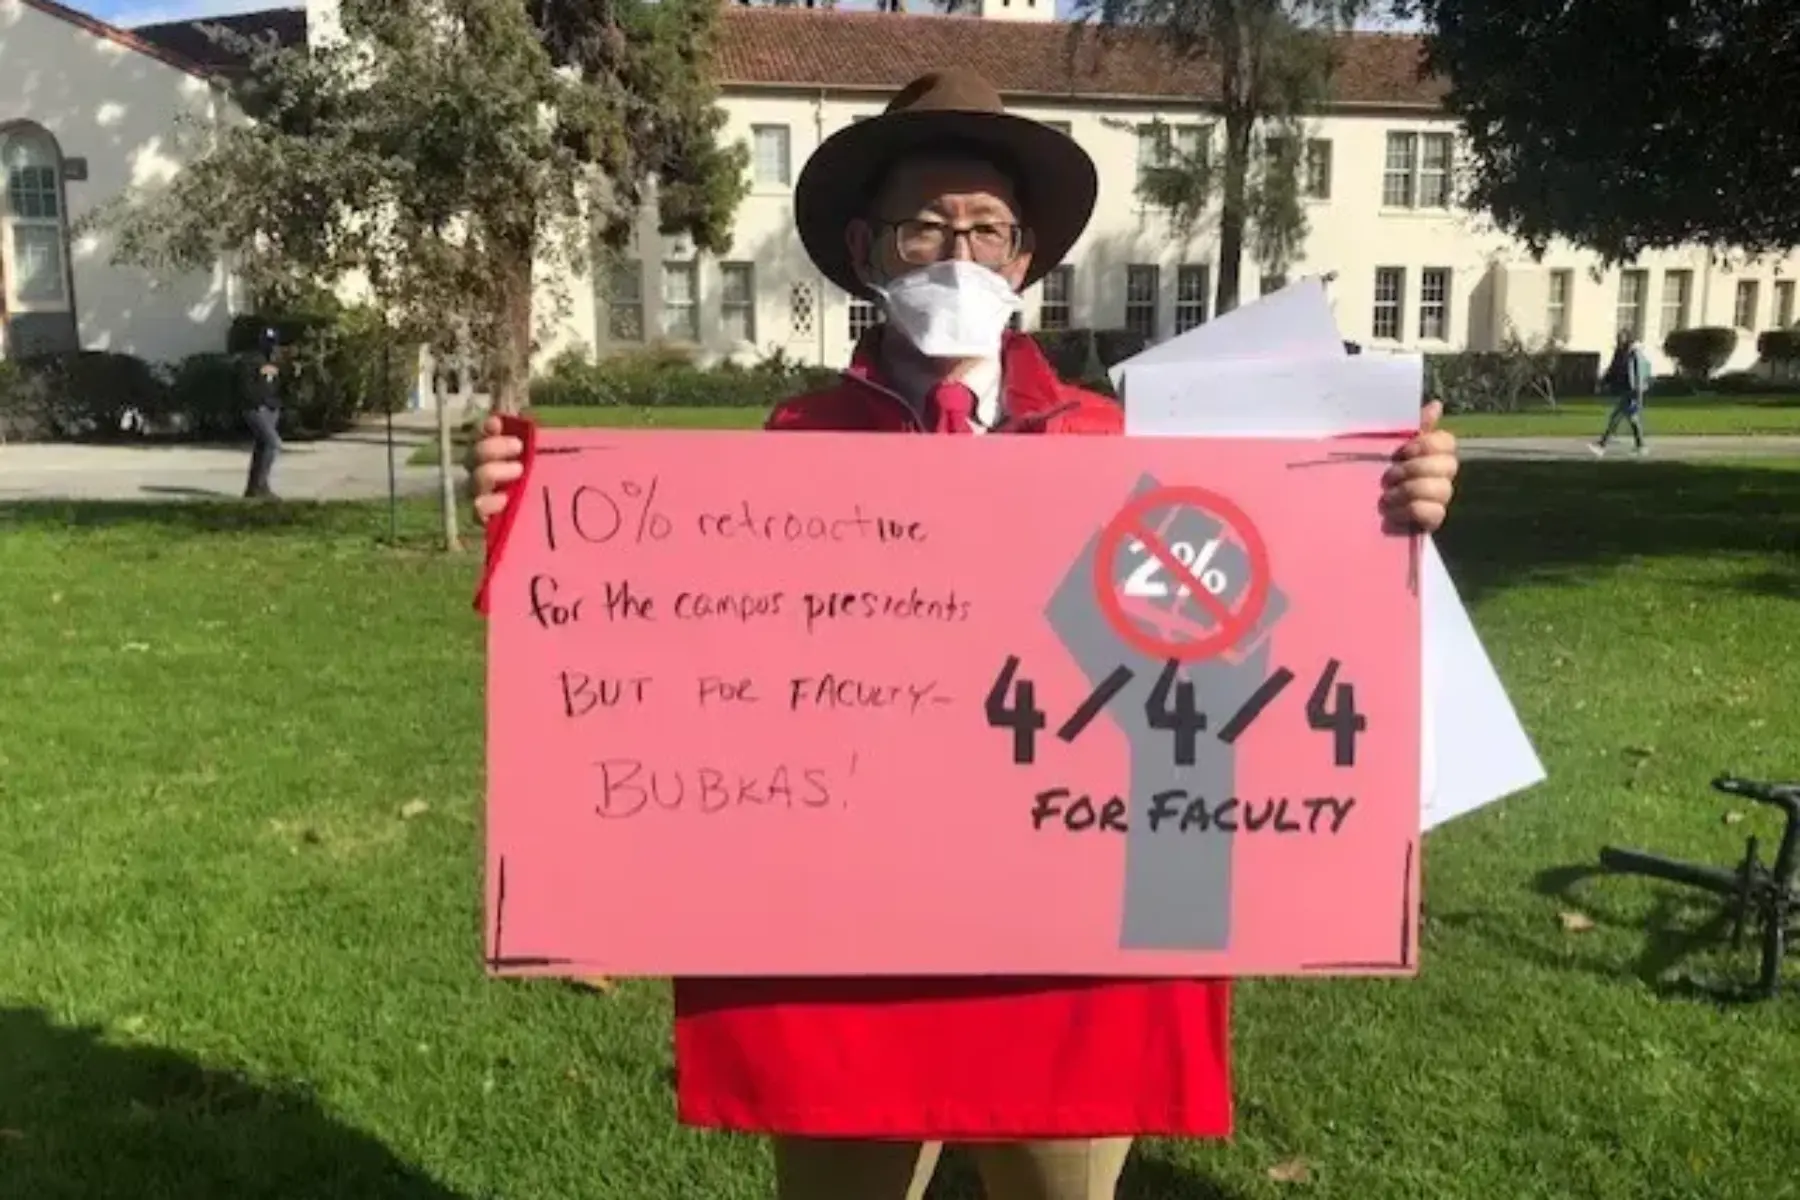 Image of person with a poster saying 4% for faculty